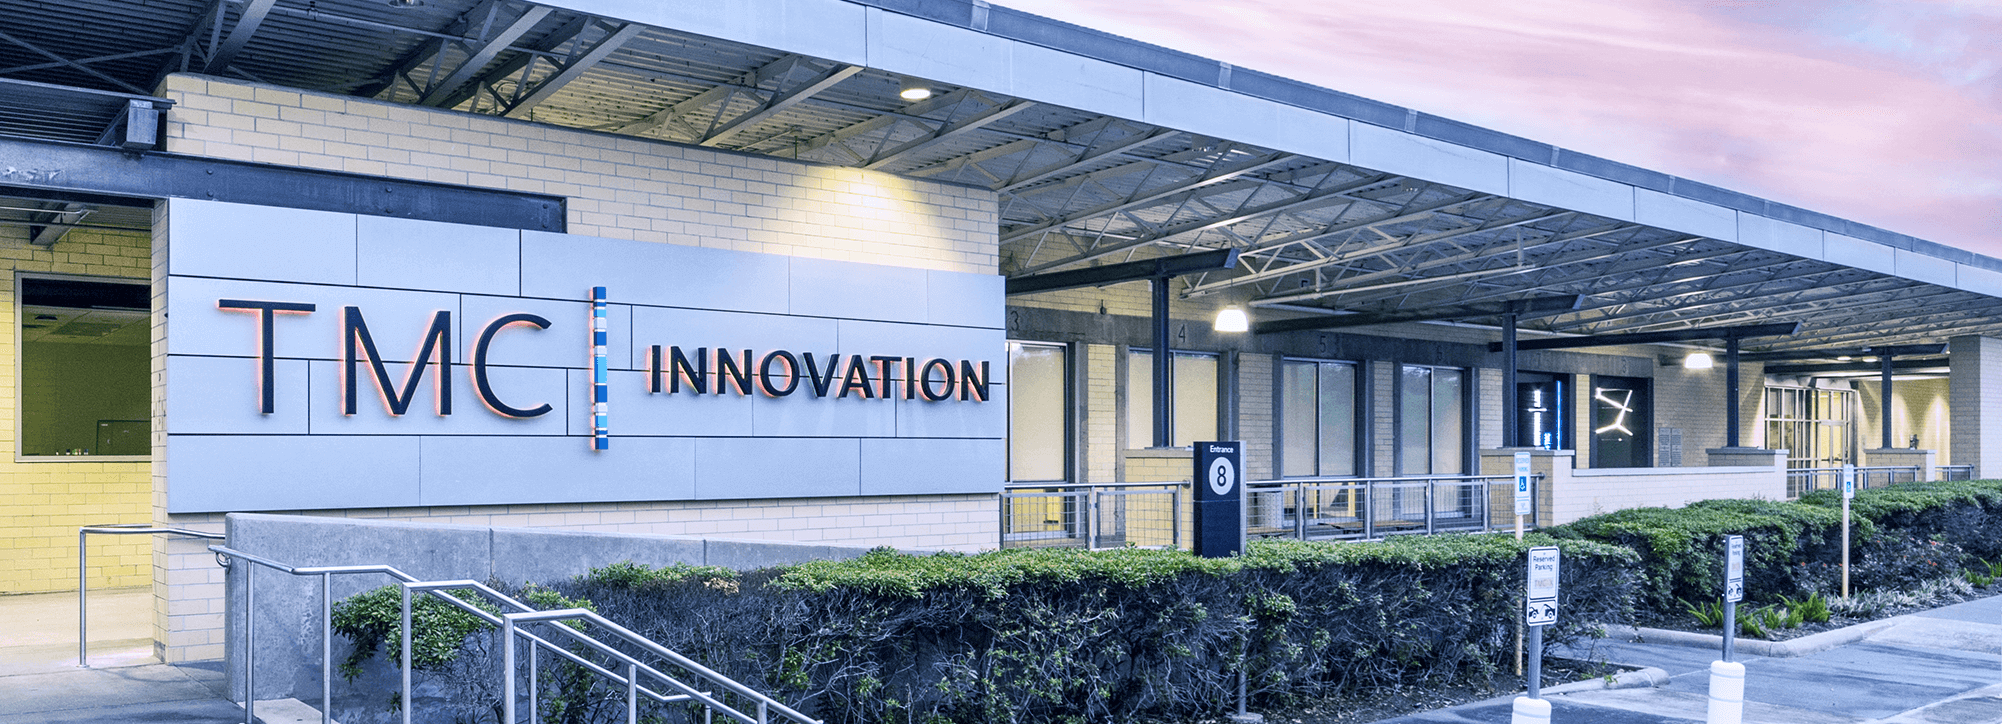 TMC Innovation sign in front of their leasing building.